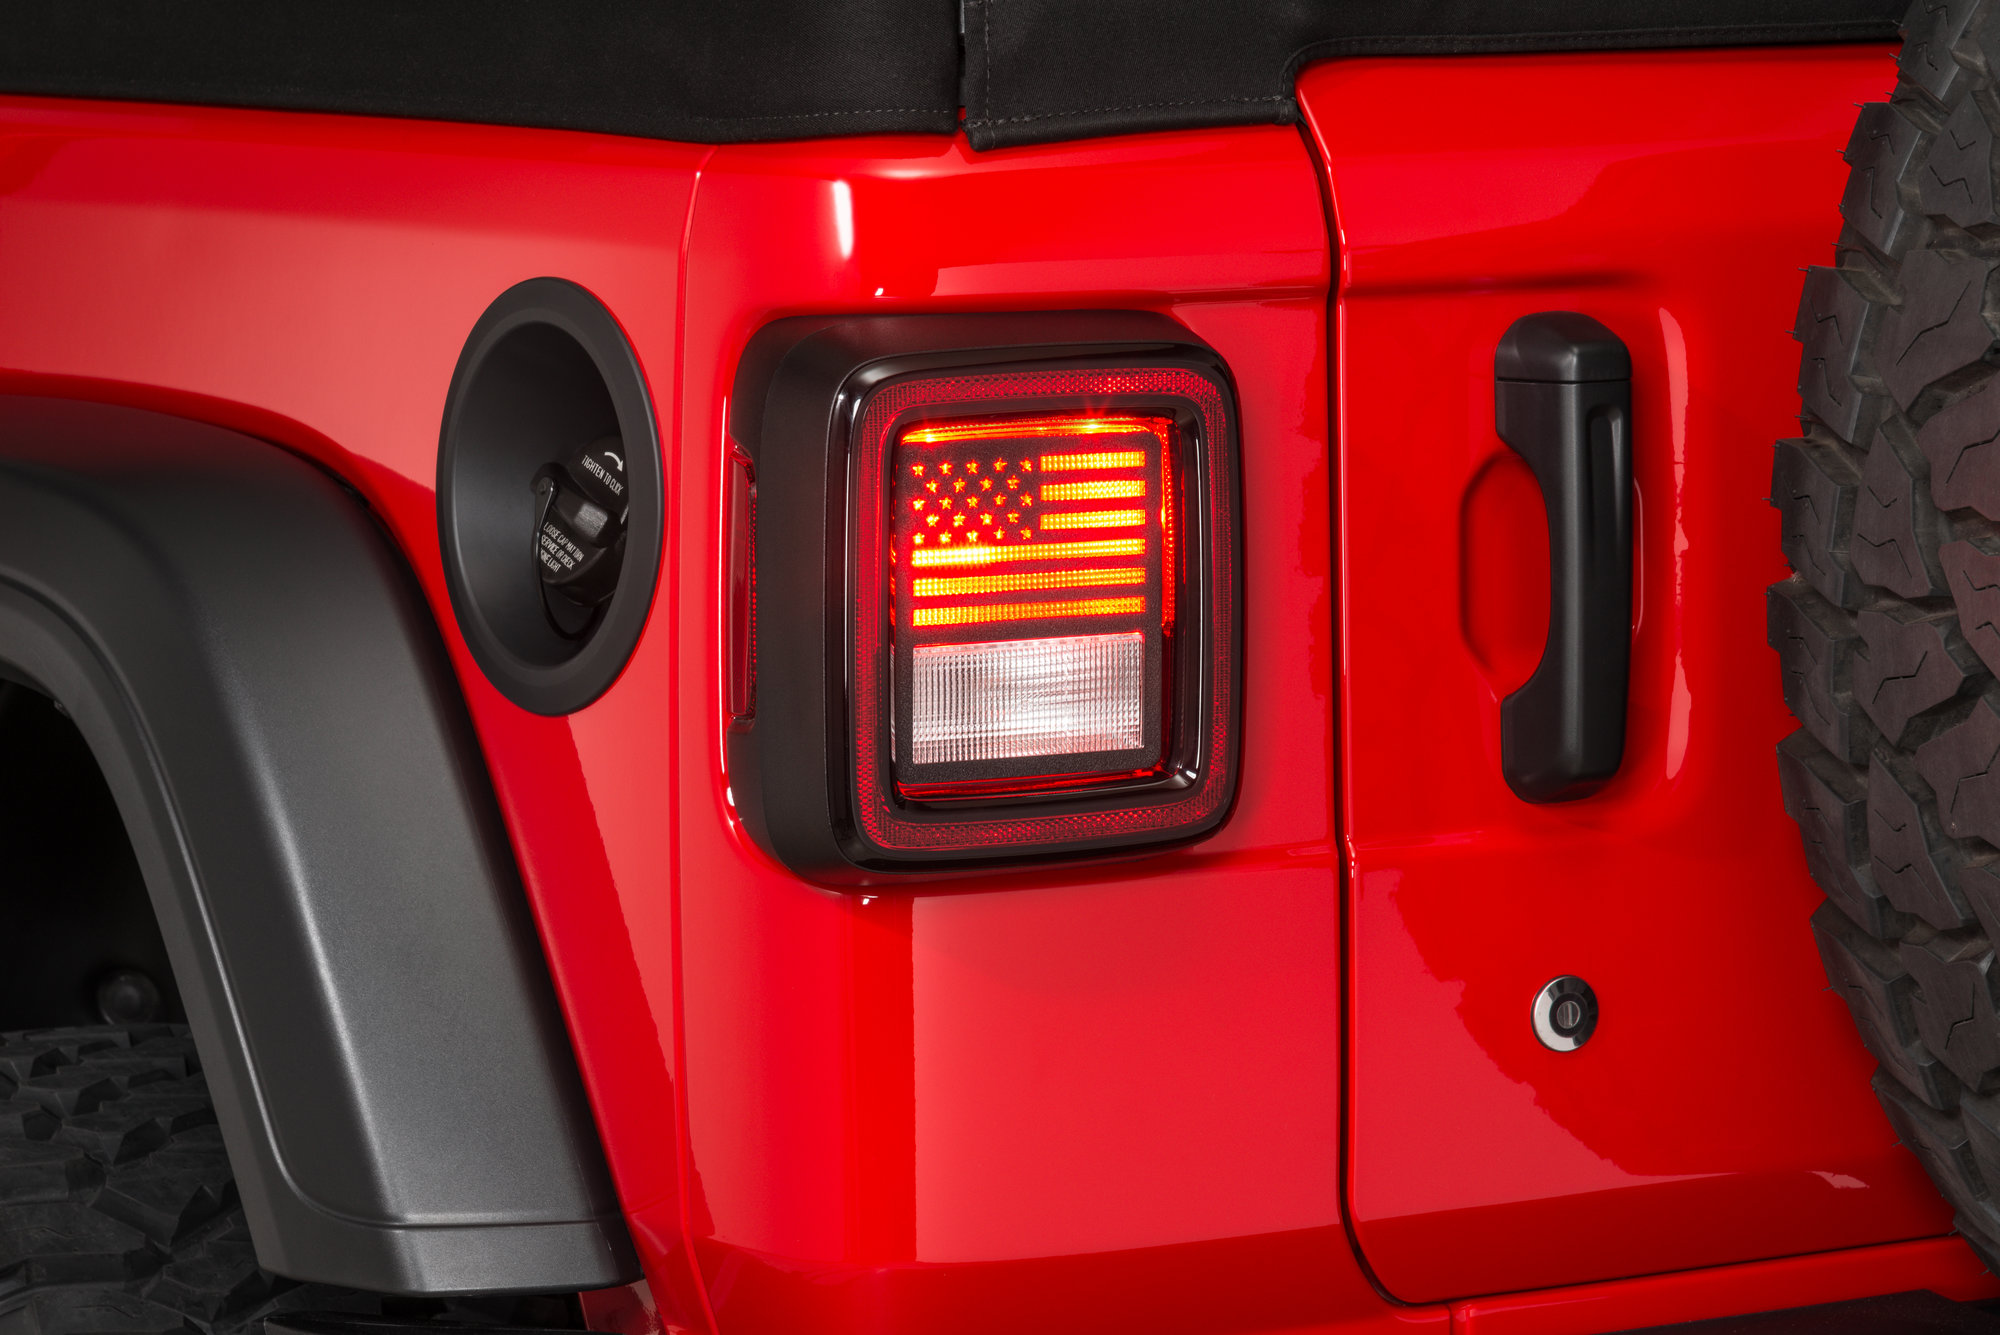 Set of 2 JeepTails Bigfoot Horns and US Flag Tail lamp Light Covers Compatible with Jeep JK Wrangler 